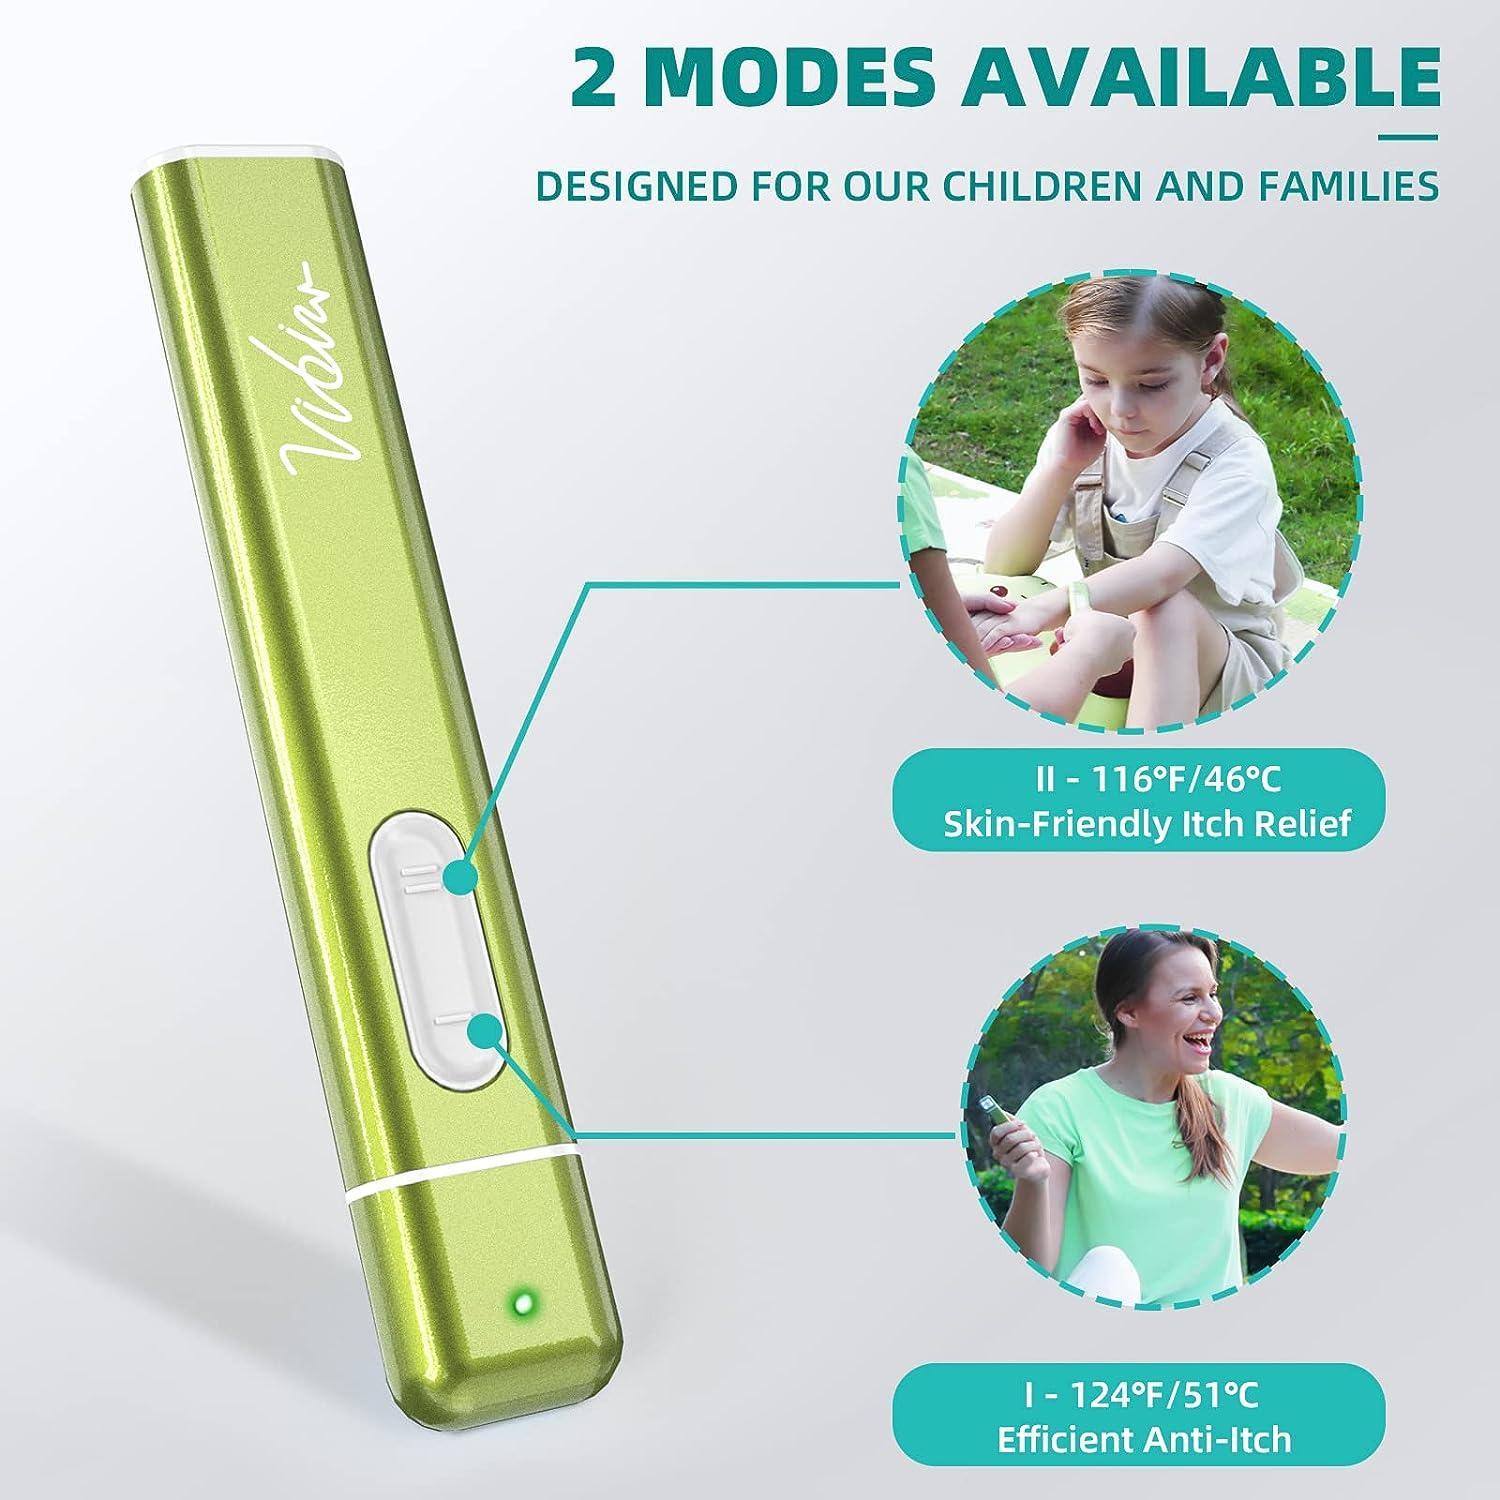 Vibis Insect Bite and Sting Relief Rechargeable Bug Bite Itch Relief Thing  Fast Symptom Relief for Mosquito Bites Chemical-Free Treatment Natural  Relief from Bug and Mosquito Bites Itching - Green